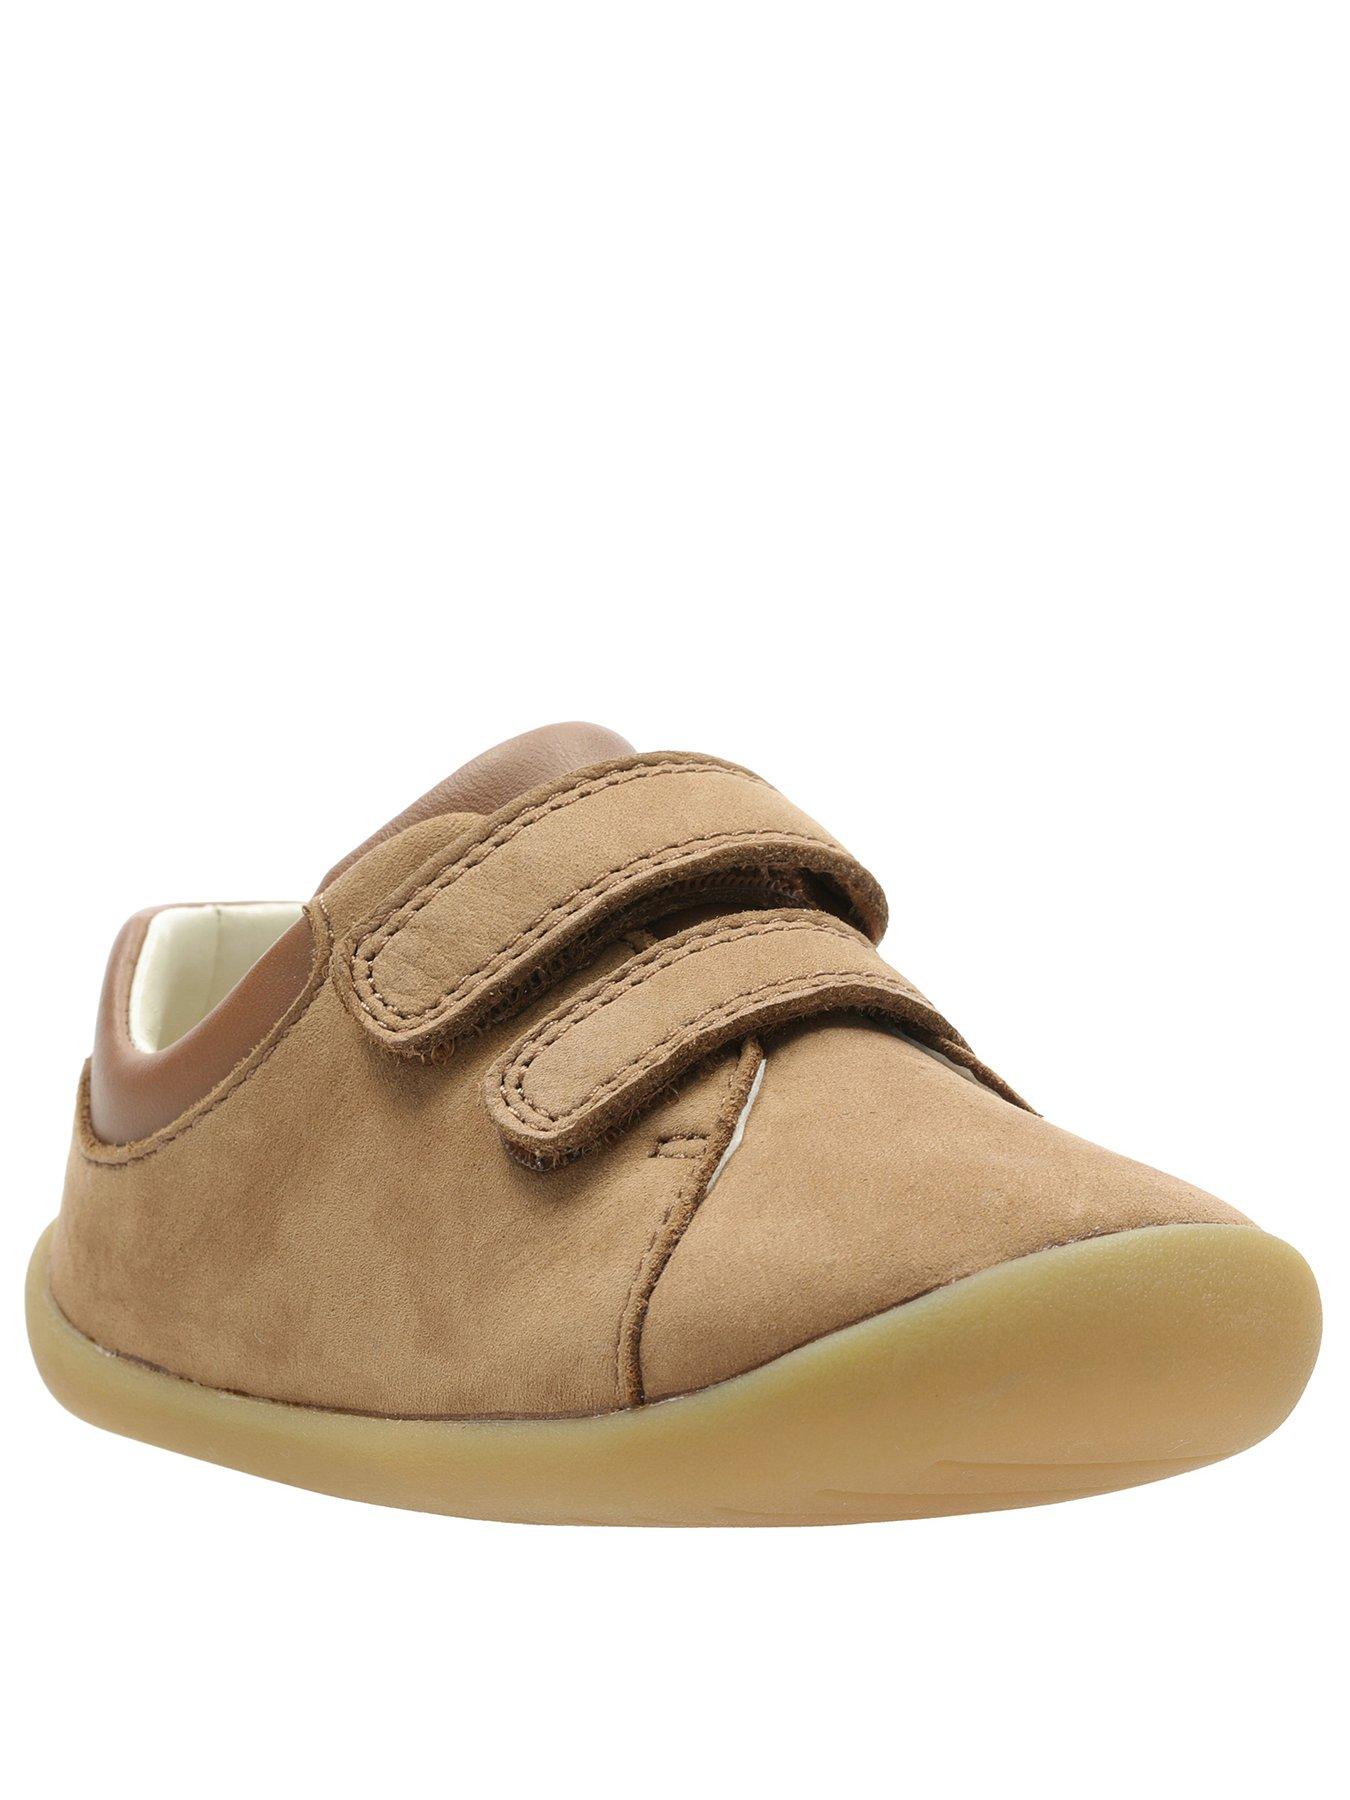 Shoes & boots Roamer Craft First Shoes - Tan